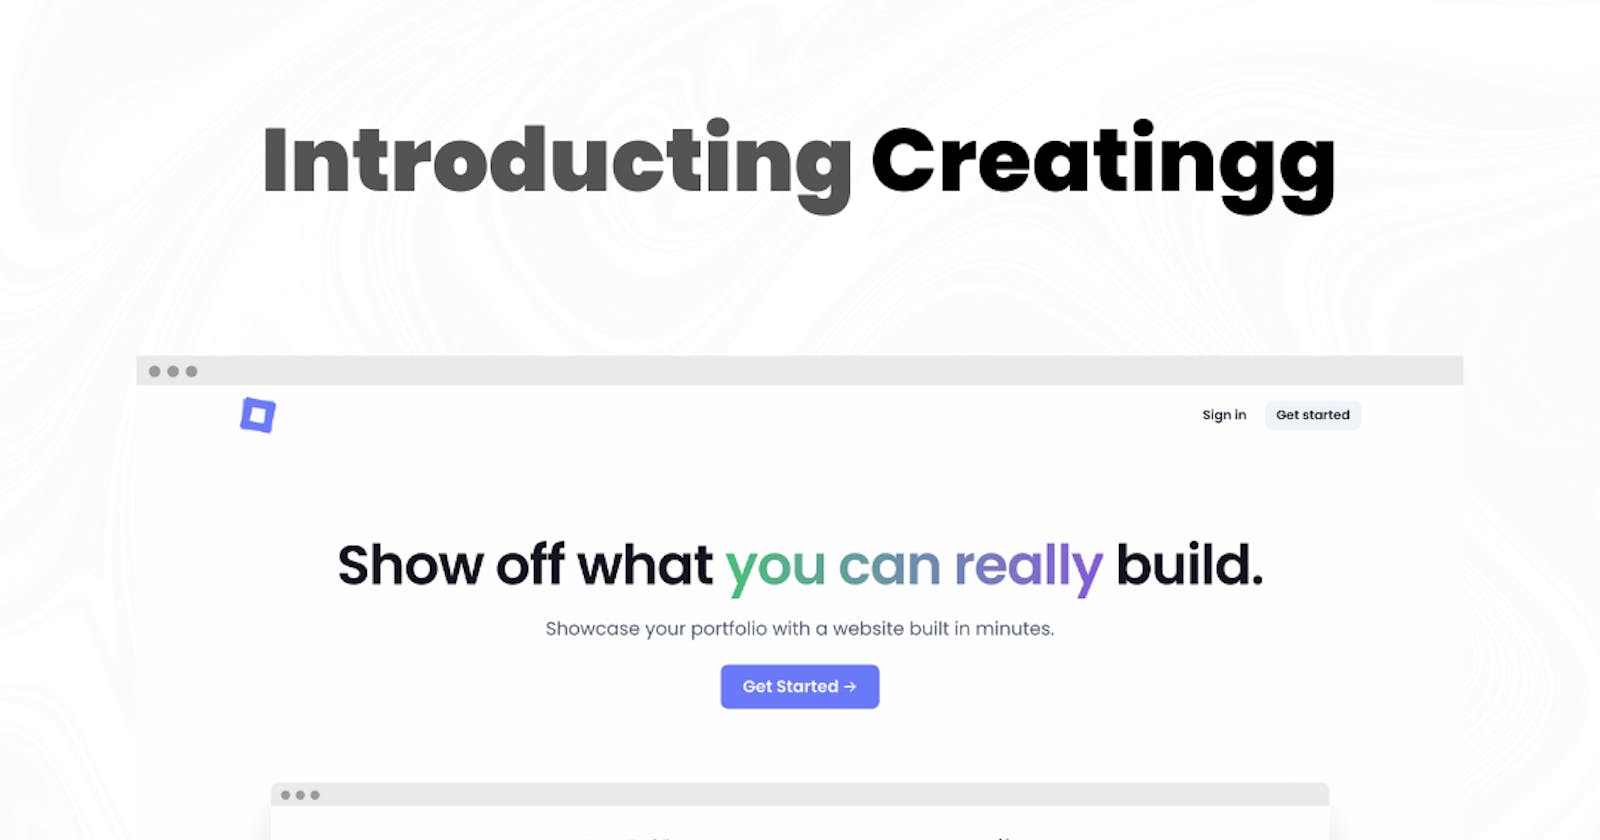 Introducing creatingg - showcase your portfolio with a website built in minutes.